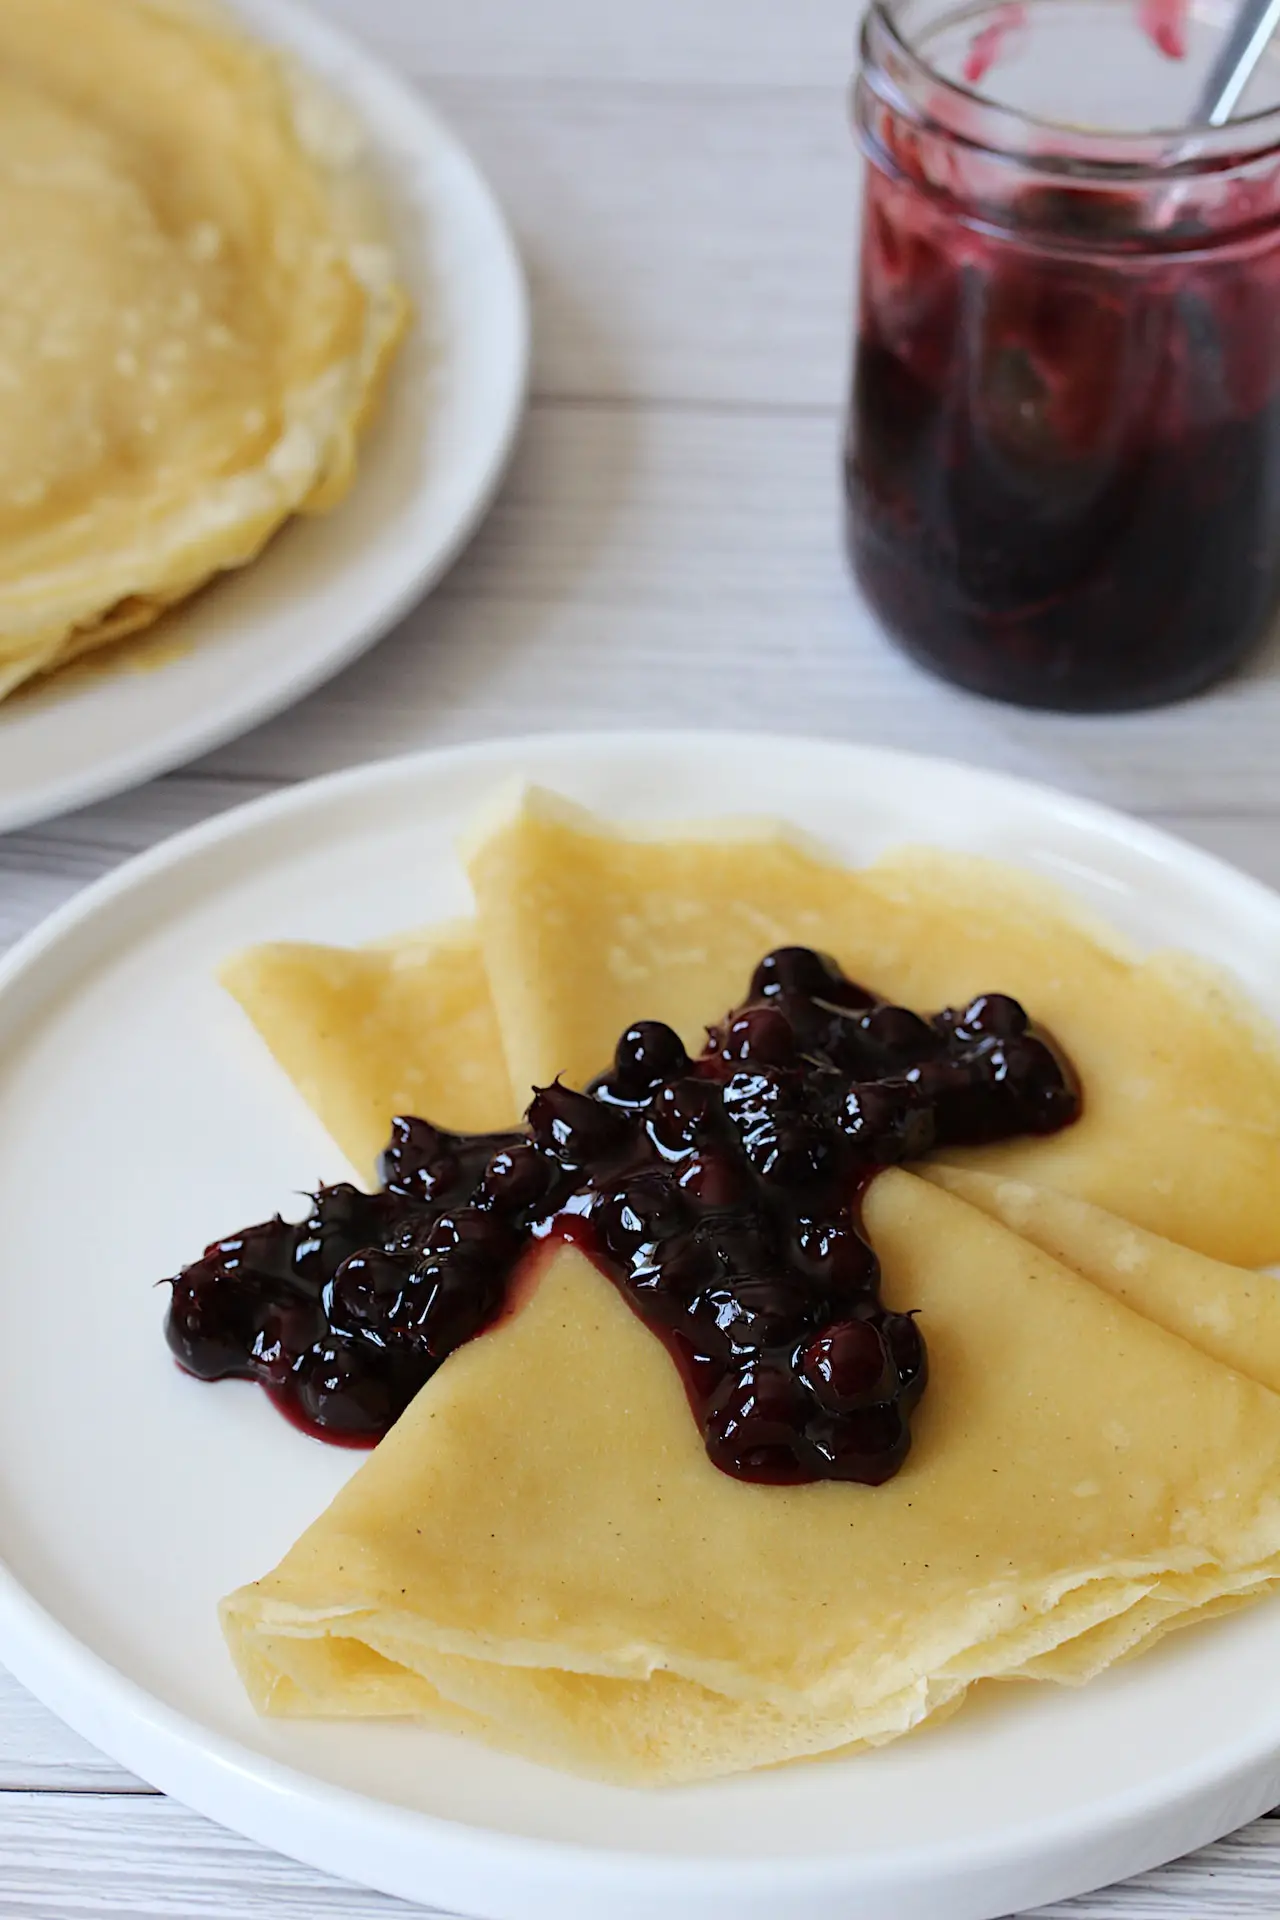 Image of folded crepes on a white plate with Saskatoon berry sauce. In the background is the jar of Saskatoon berry sauce and the plate of stacked crepes.